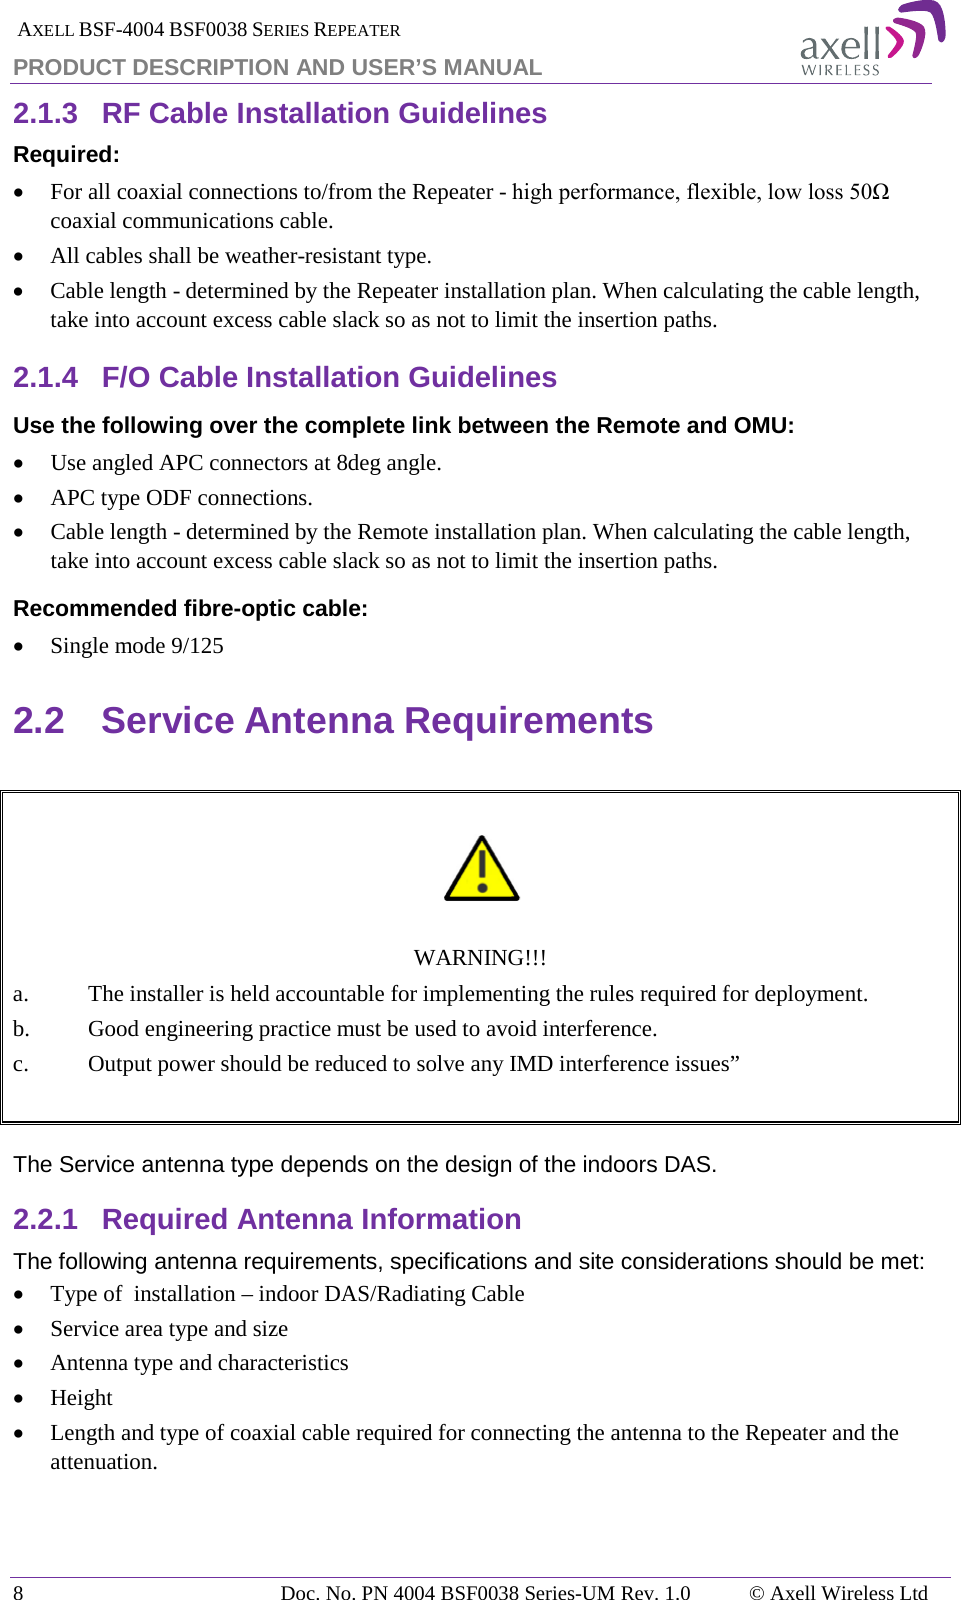  AXELL BSF-4004 BSF0038 SERIES REPEATER PRODUCT DESCRIPTION AND USER’S MANUAL 2.1.3 RF Cable Installation Guidelines Required: • For all coaxial connections to/from the Repeater - high performance, flexible, low loss 50Ω coaxial communications cable.  • All cables shall be weather-resistant type.  • Cable length - determined by the Repeater installation plan. When calculating the cable length, take into account excess cable slack so as not to limit the insertion paths. 2.1.4 F/O Cable Installation Guidelines Use the following over the complete link between the Remote and OMU: • Use angled APC connectors at 8deg angle. • APC type ODF connections. • Cable length - determined by the Remote installation plan. When calculating the cable length, take into account excess cable slack so as not to limit the insertion paths. Recommended fibre-optic cable:  • Single mode 9/125 2.2 Service Antenna Requirements     WARNING!!! a. The installer is held accountable for implementing the rules required for deployment. b.  Good engineering practice must be used to avoid interference. c.  Output power should be reduced to solve any IMD interference issues”   The Service antenna type depends on the design of the indoors DAS.  2.2.1 Required Antenna Information The following antenna requirements, specifications and site considerations should be met: • Type of  installation – indoor DAS/Radiating Cable • Service area type and size  • Antenna type and characteristics • Height • Length and type of coaxial cable required for connecting the antenna to the Repeater and the attenuation.    8  Doc. No. PN 4004 BSF0038 Series-UM Rev. 1.0  © Axell Wireless Ltd 